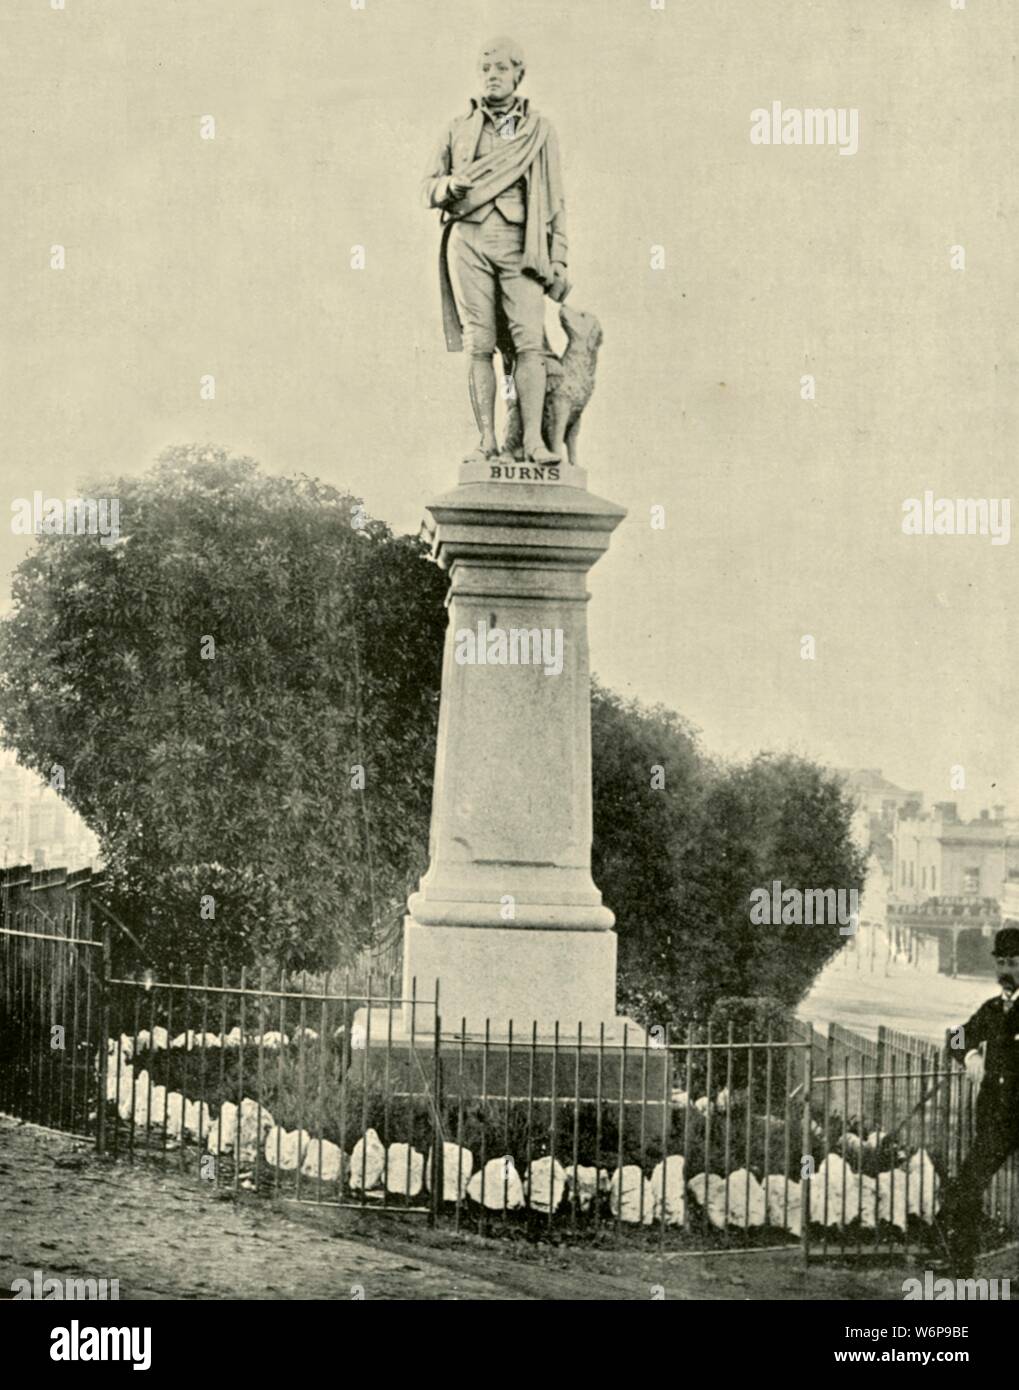 'Statue of Robert Burns, Ballarat', 1901. Eight statues of Robert Burns were erected in Australia between 1883 and 1935, this was the first. From &quot;Federated Australia&quot;. [The Werner Company, London, 1901] Stock Photo